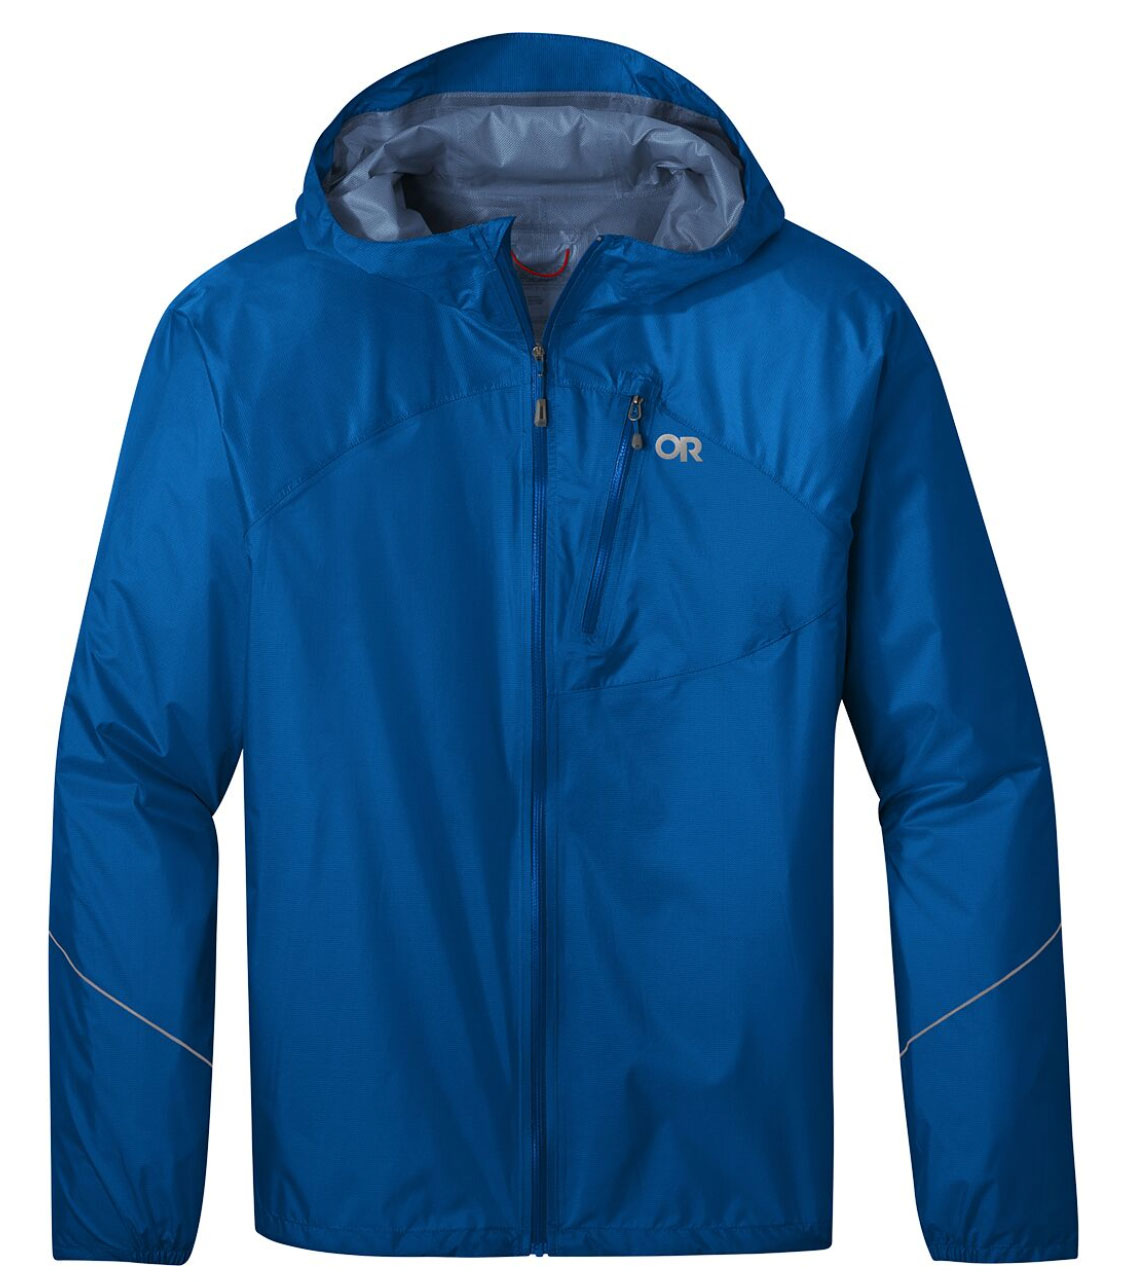 The North Face Women's DryVent Rain Jacket - Custom Branded Promotional  Jackets - Swag.com